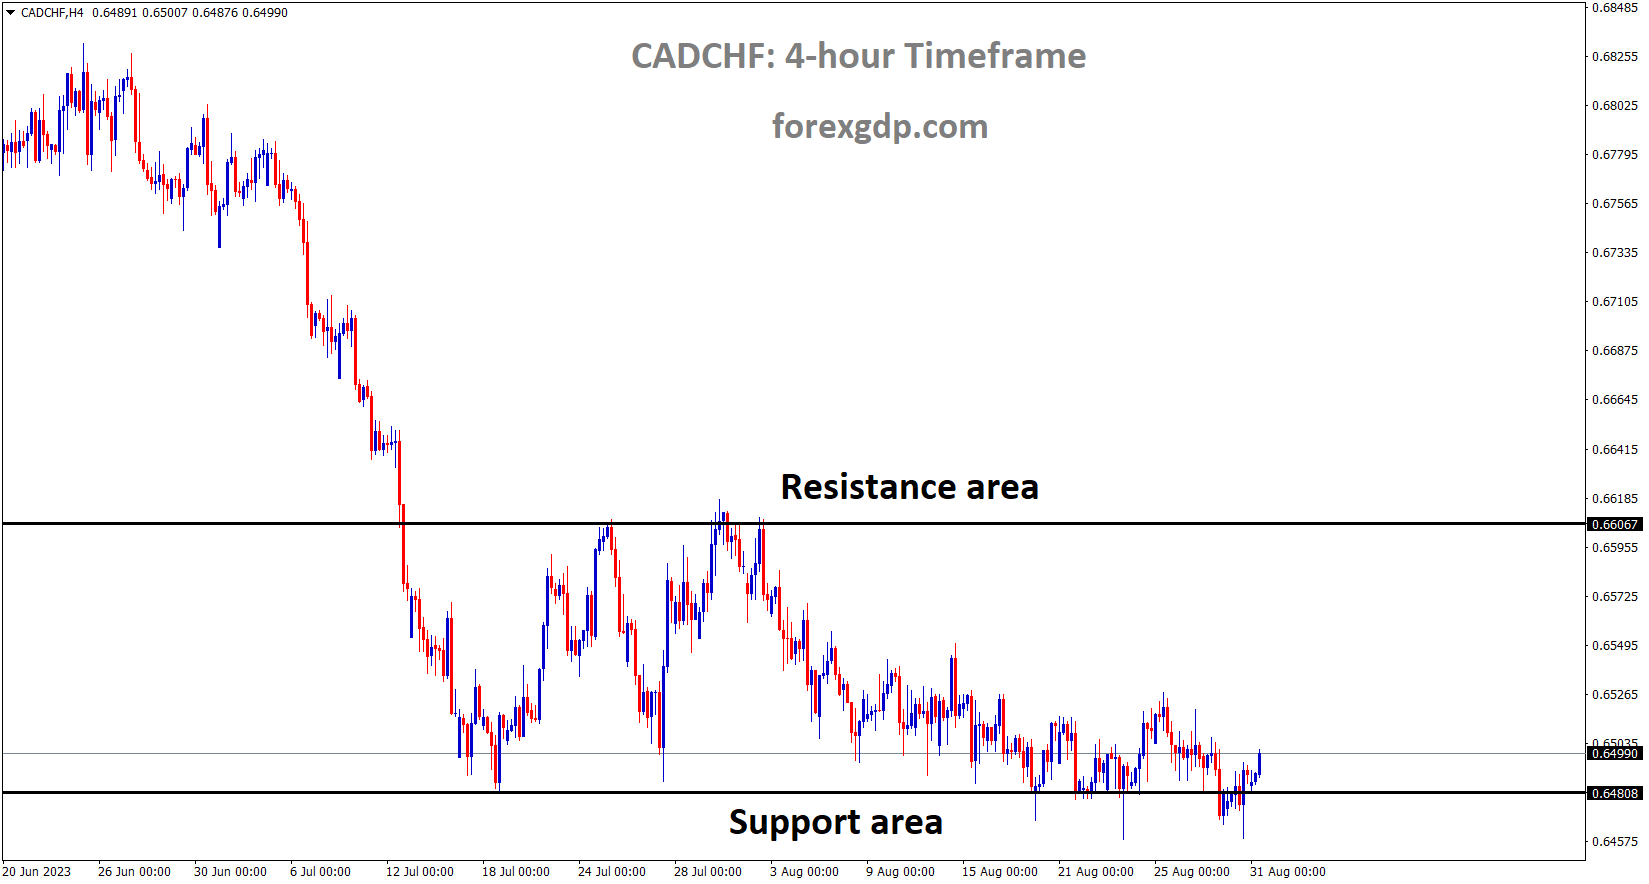 CADCHF is moving in the Box pattern and the market has rebounded from the Support area of the pattern